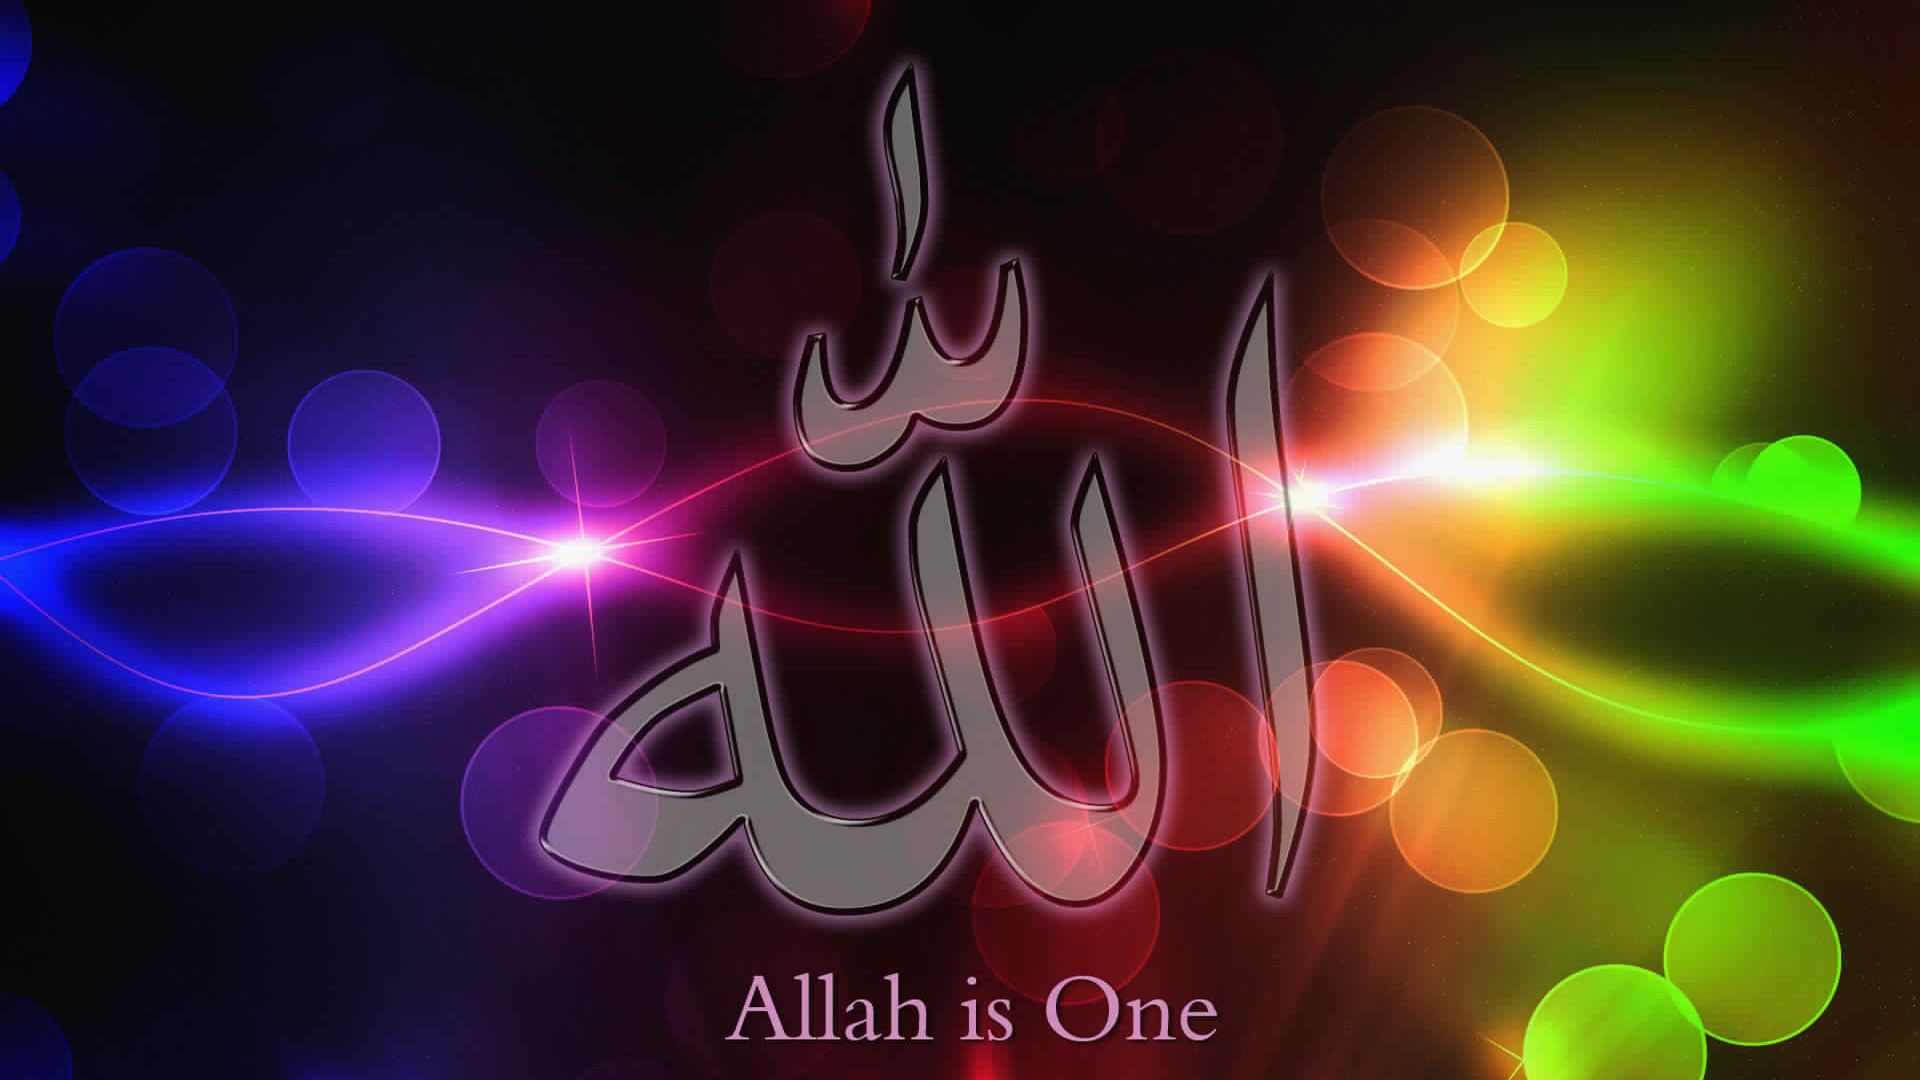 Islamic Hd Wallpapers For Mobile | Islamic Wallpapers